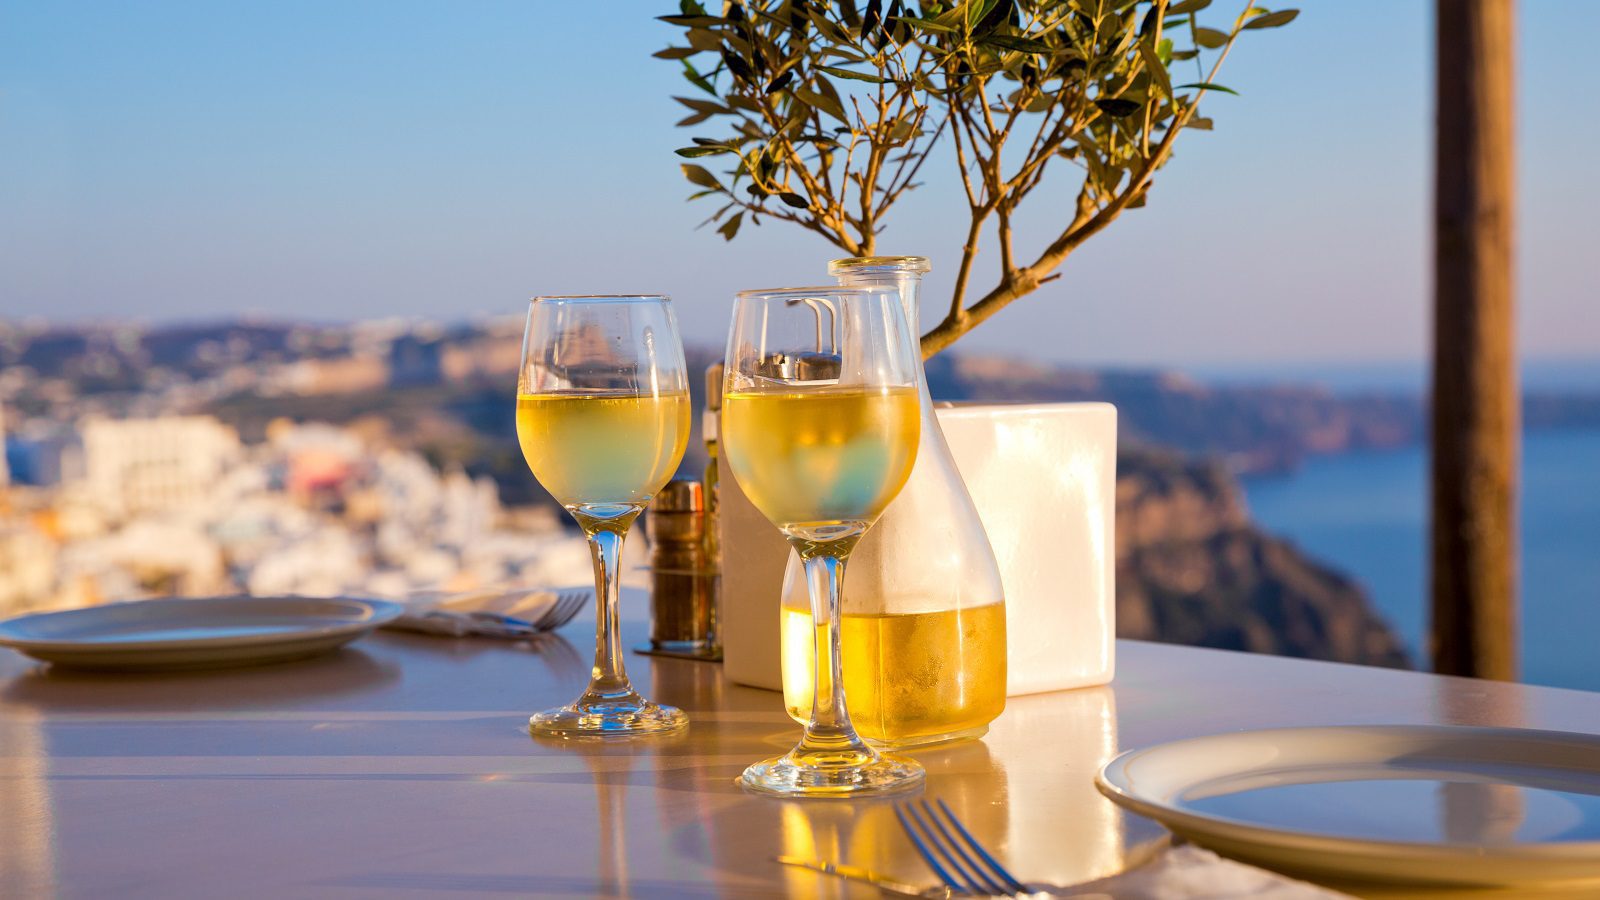 Featured image for “The Wines of Greece”